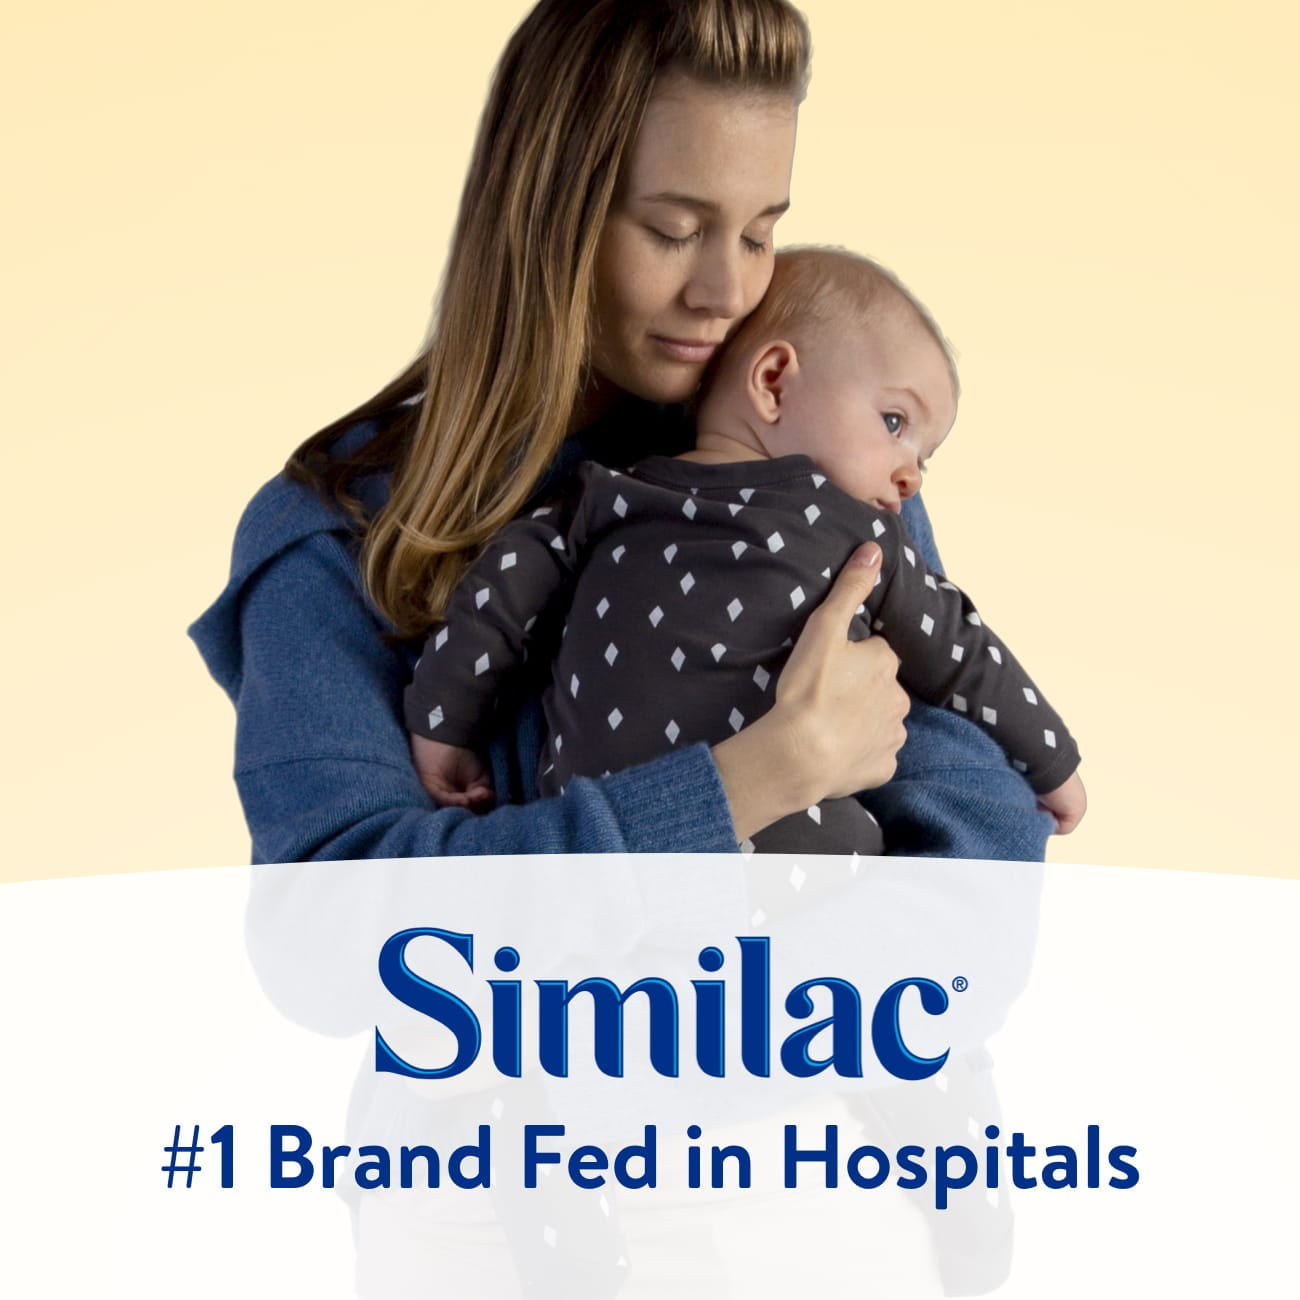 Wholesale prices with free shipping all over United States Similac Sensitive Powder Baby Formula, 12.5-oz Can - Steven Deals